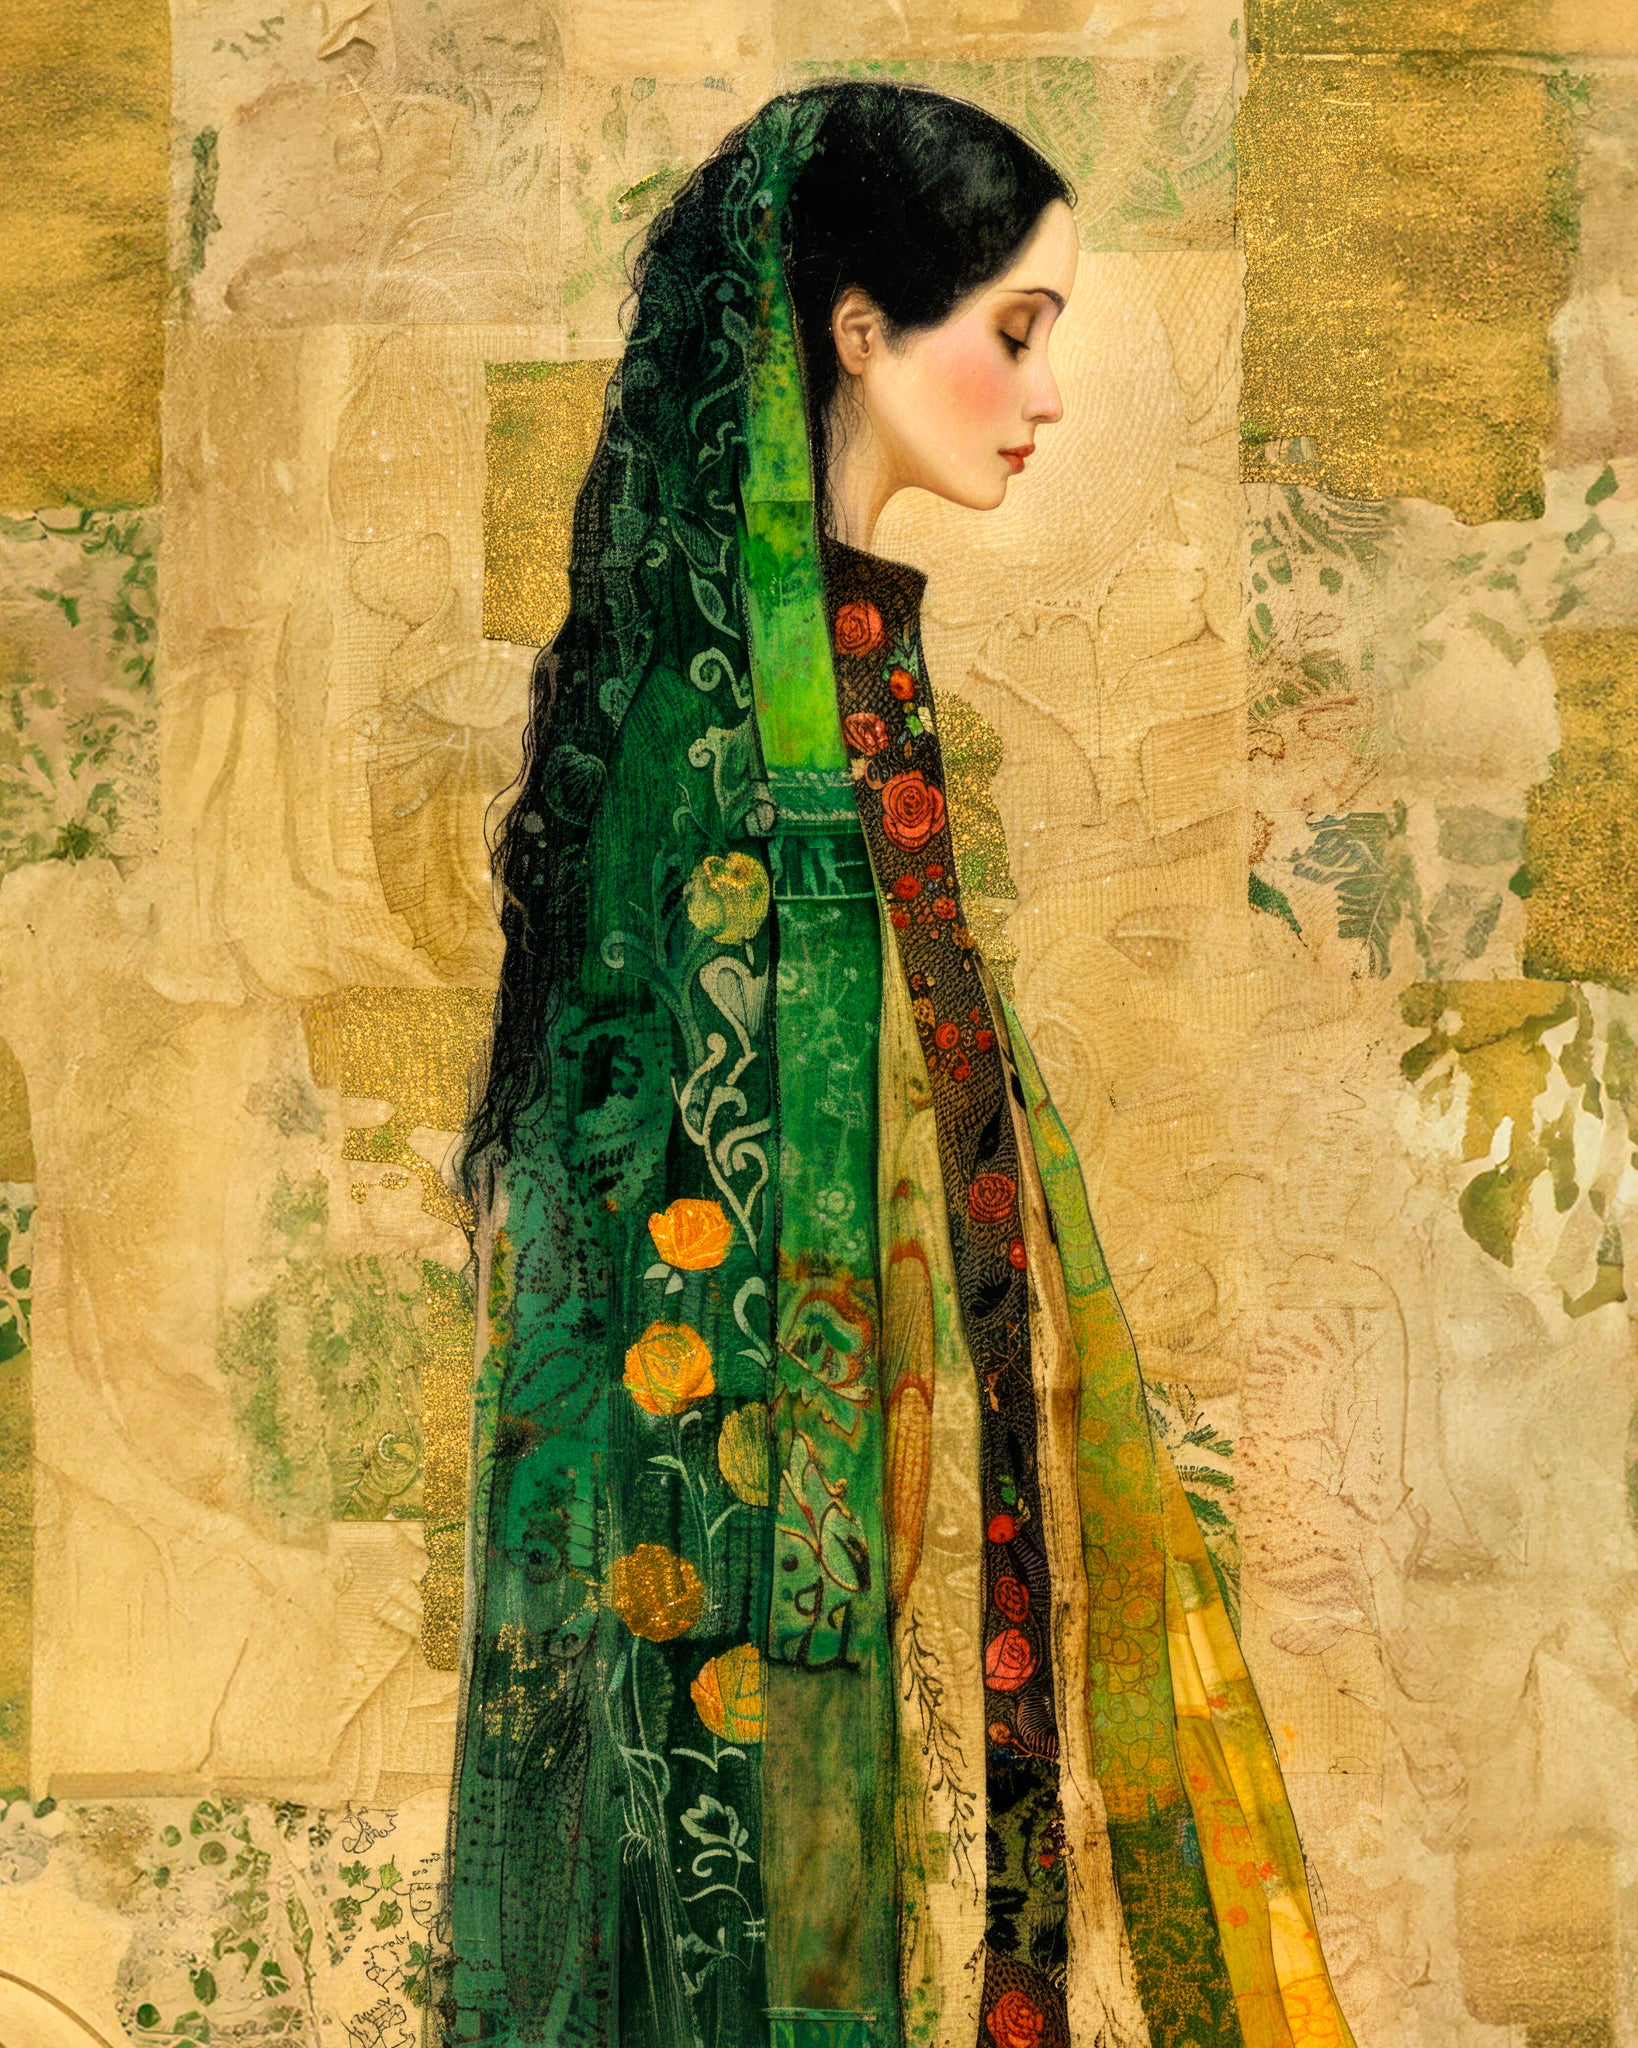 Fine art print of a woman in a green and gold veil from the Heart Of Gold collection.